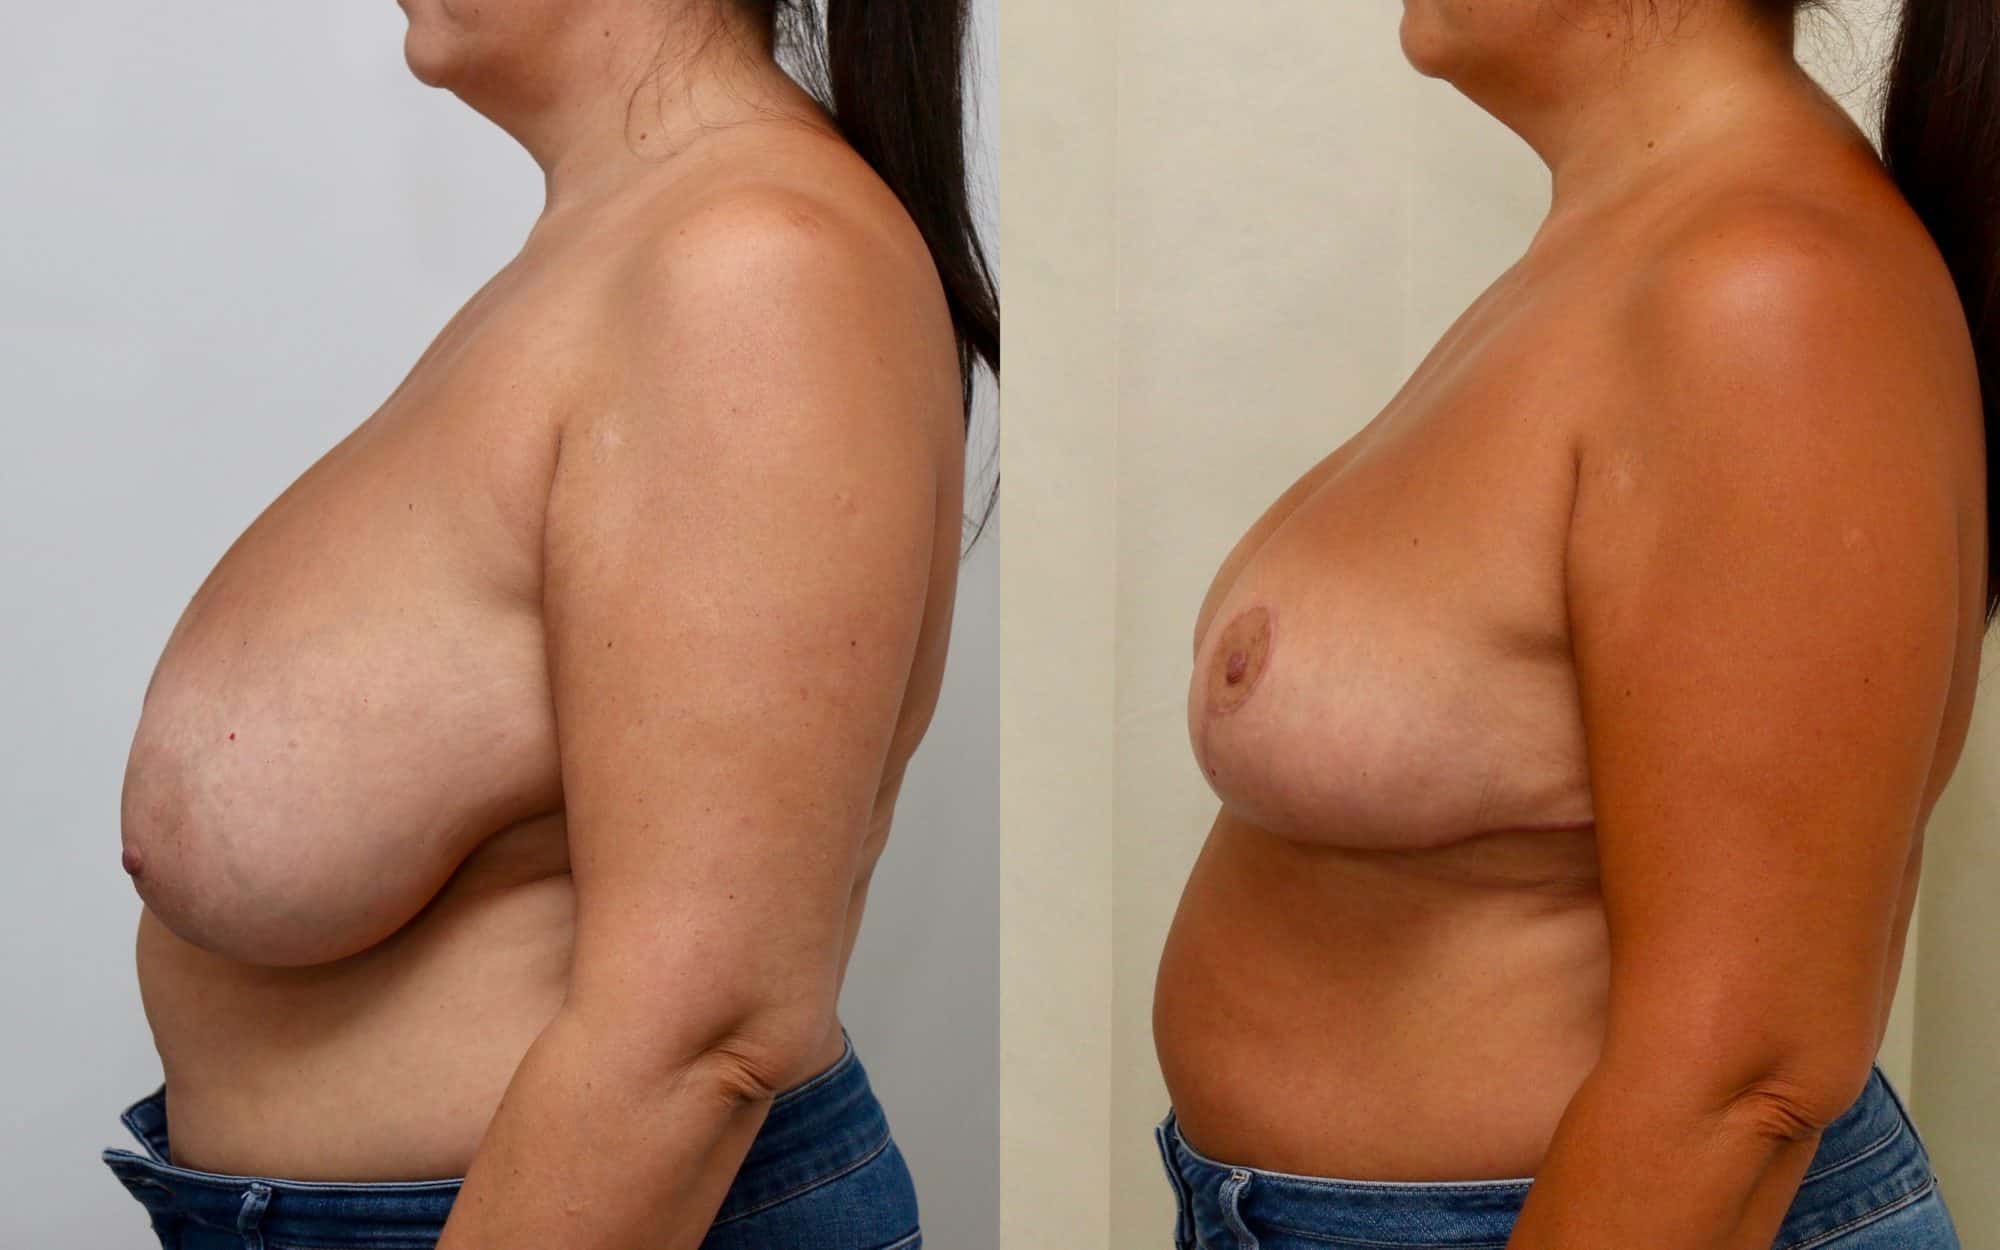 Moderate breast reduction before and after